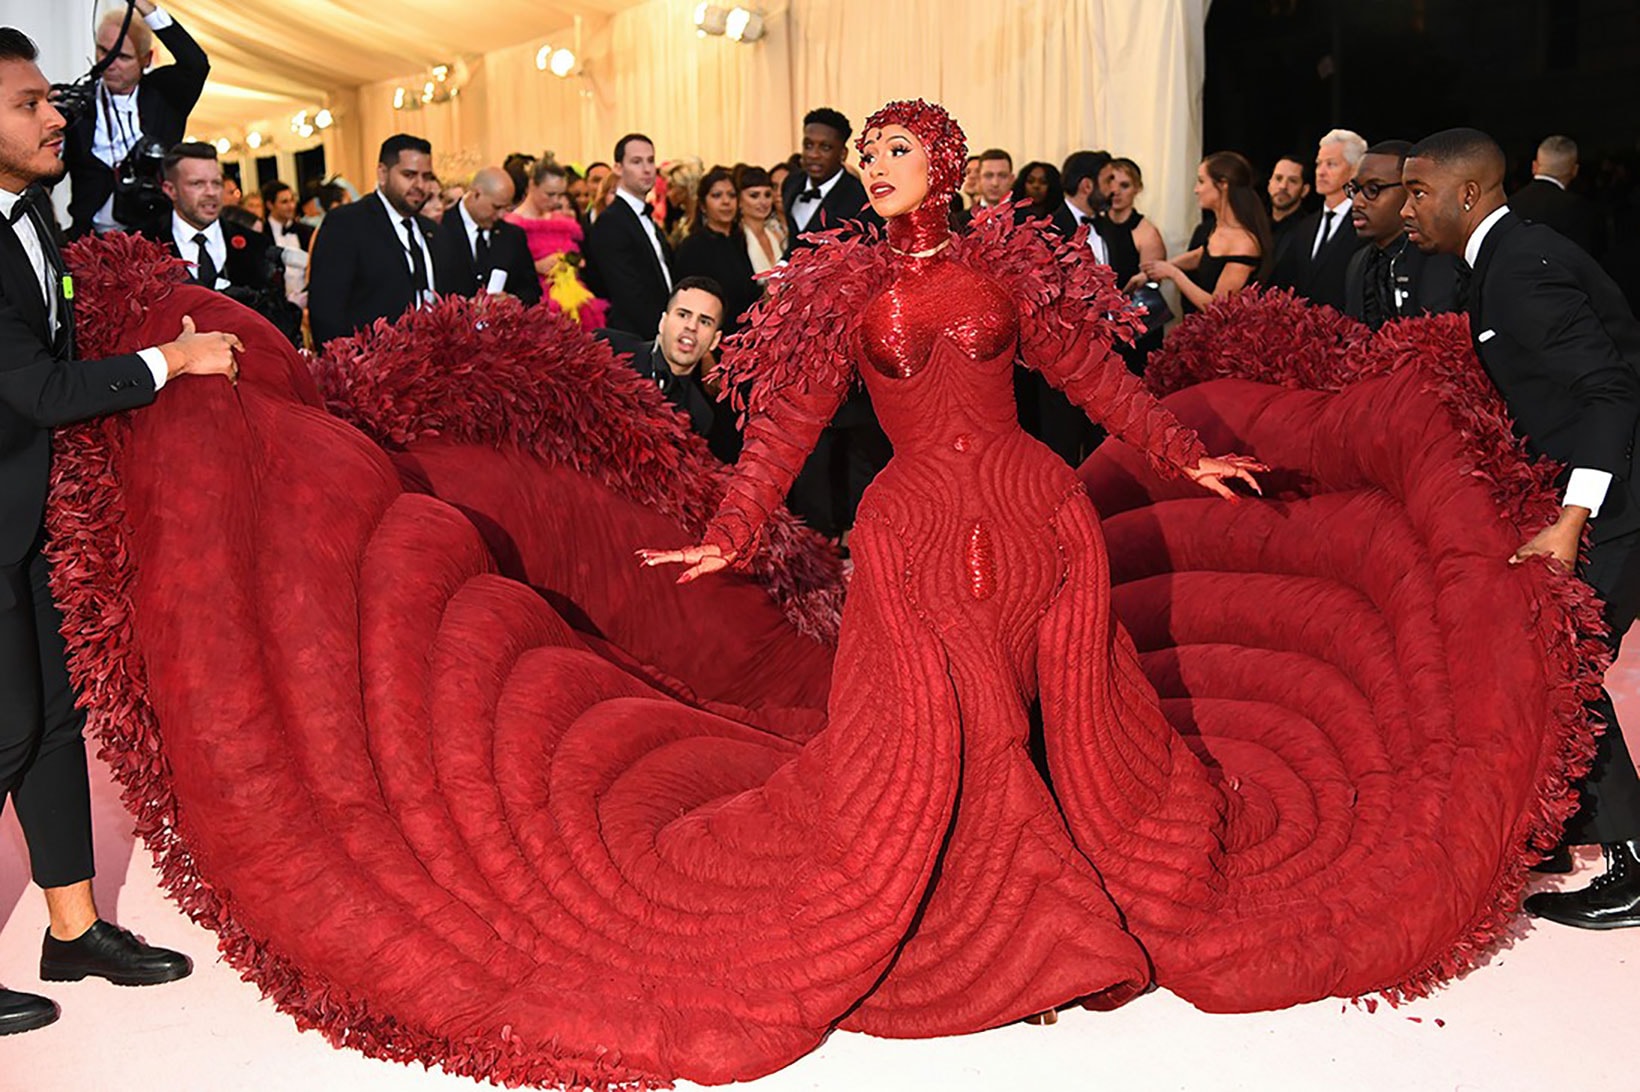 cardi b met gala thom browne red gown dress stefere jewerly